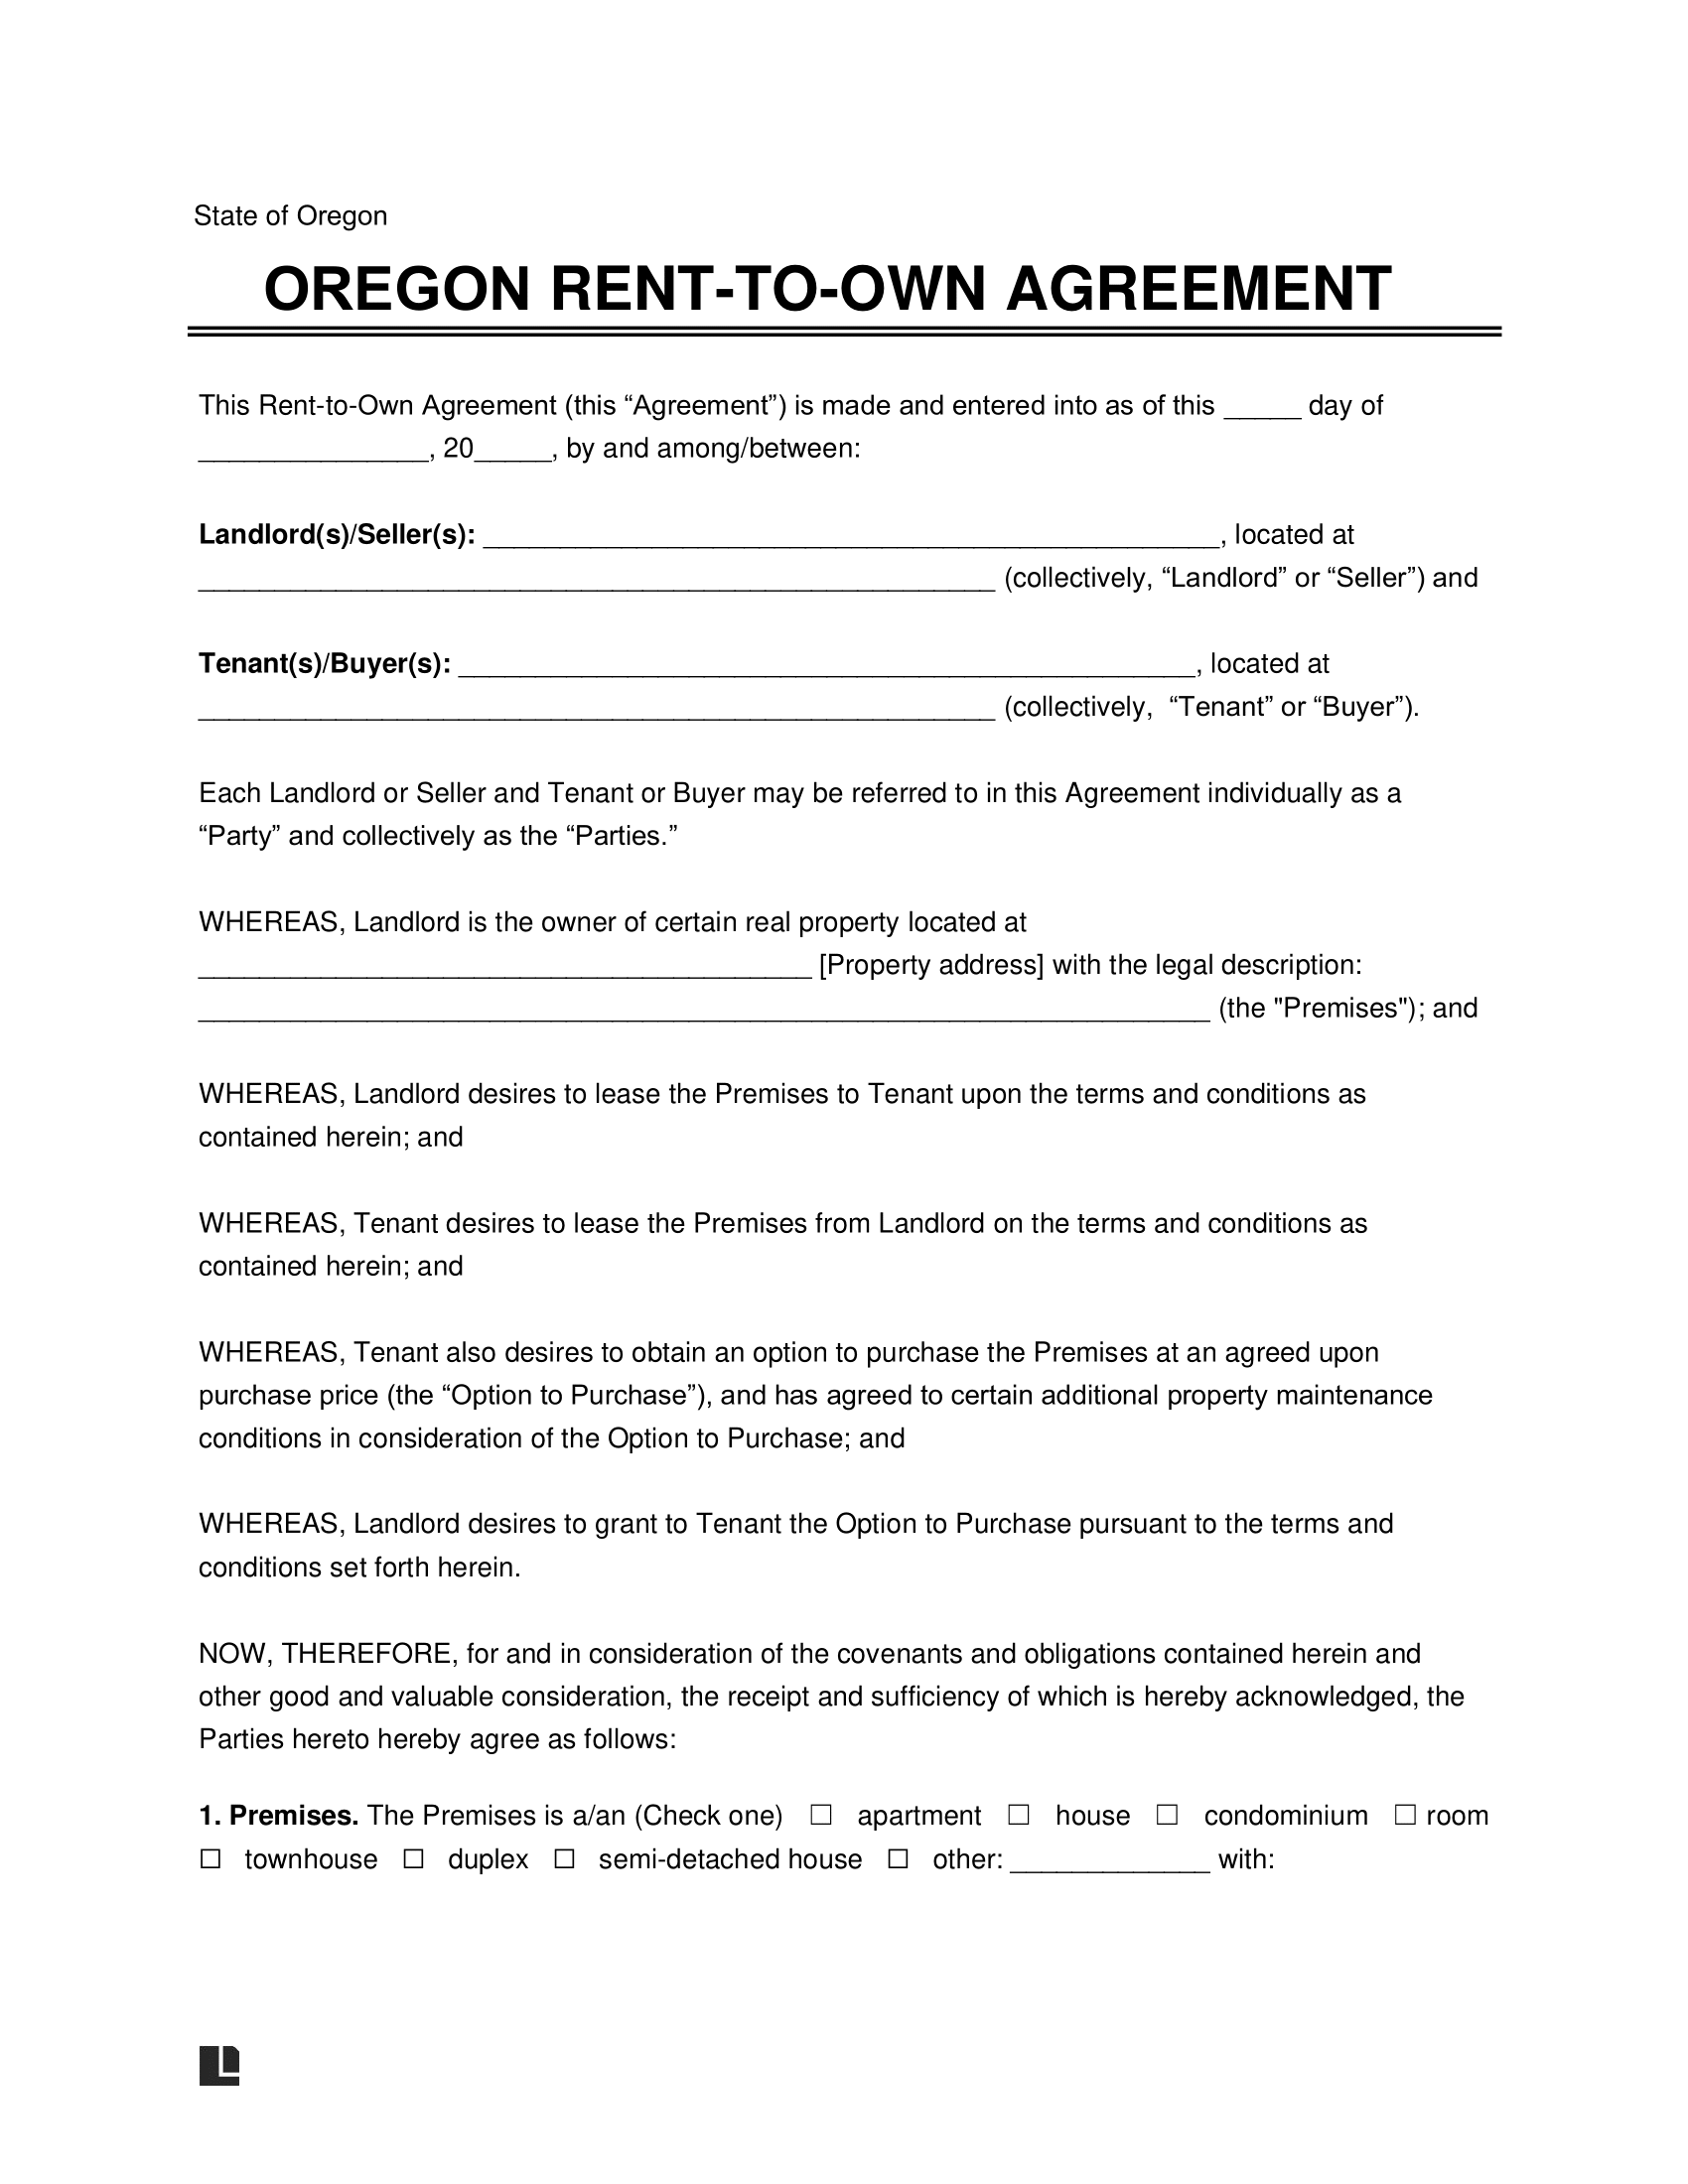 Oregon Lease-to-Own Option to Purchase-Agreement